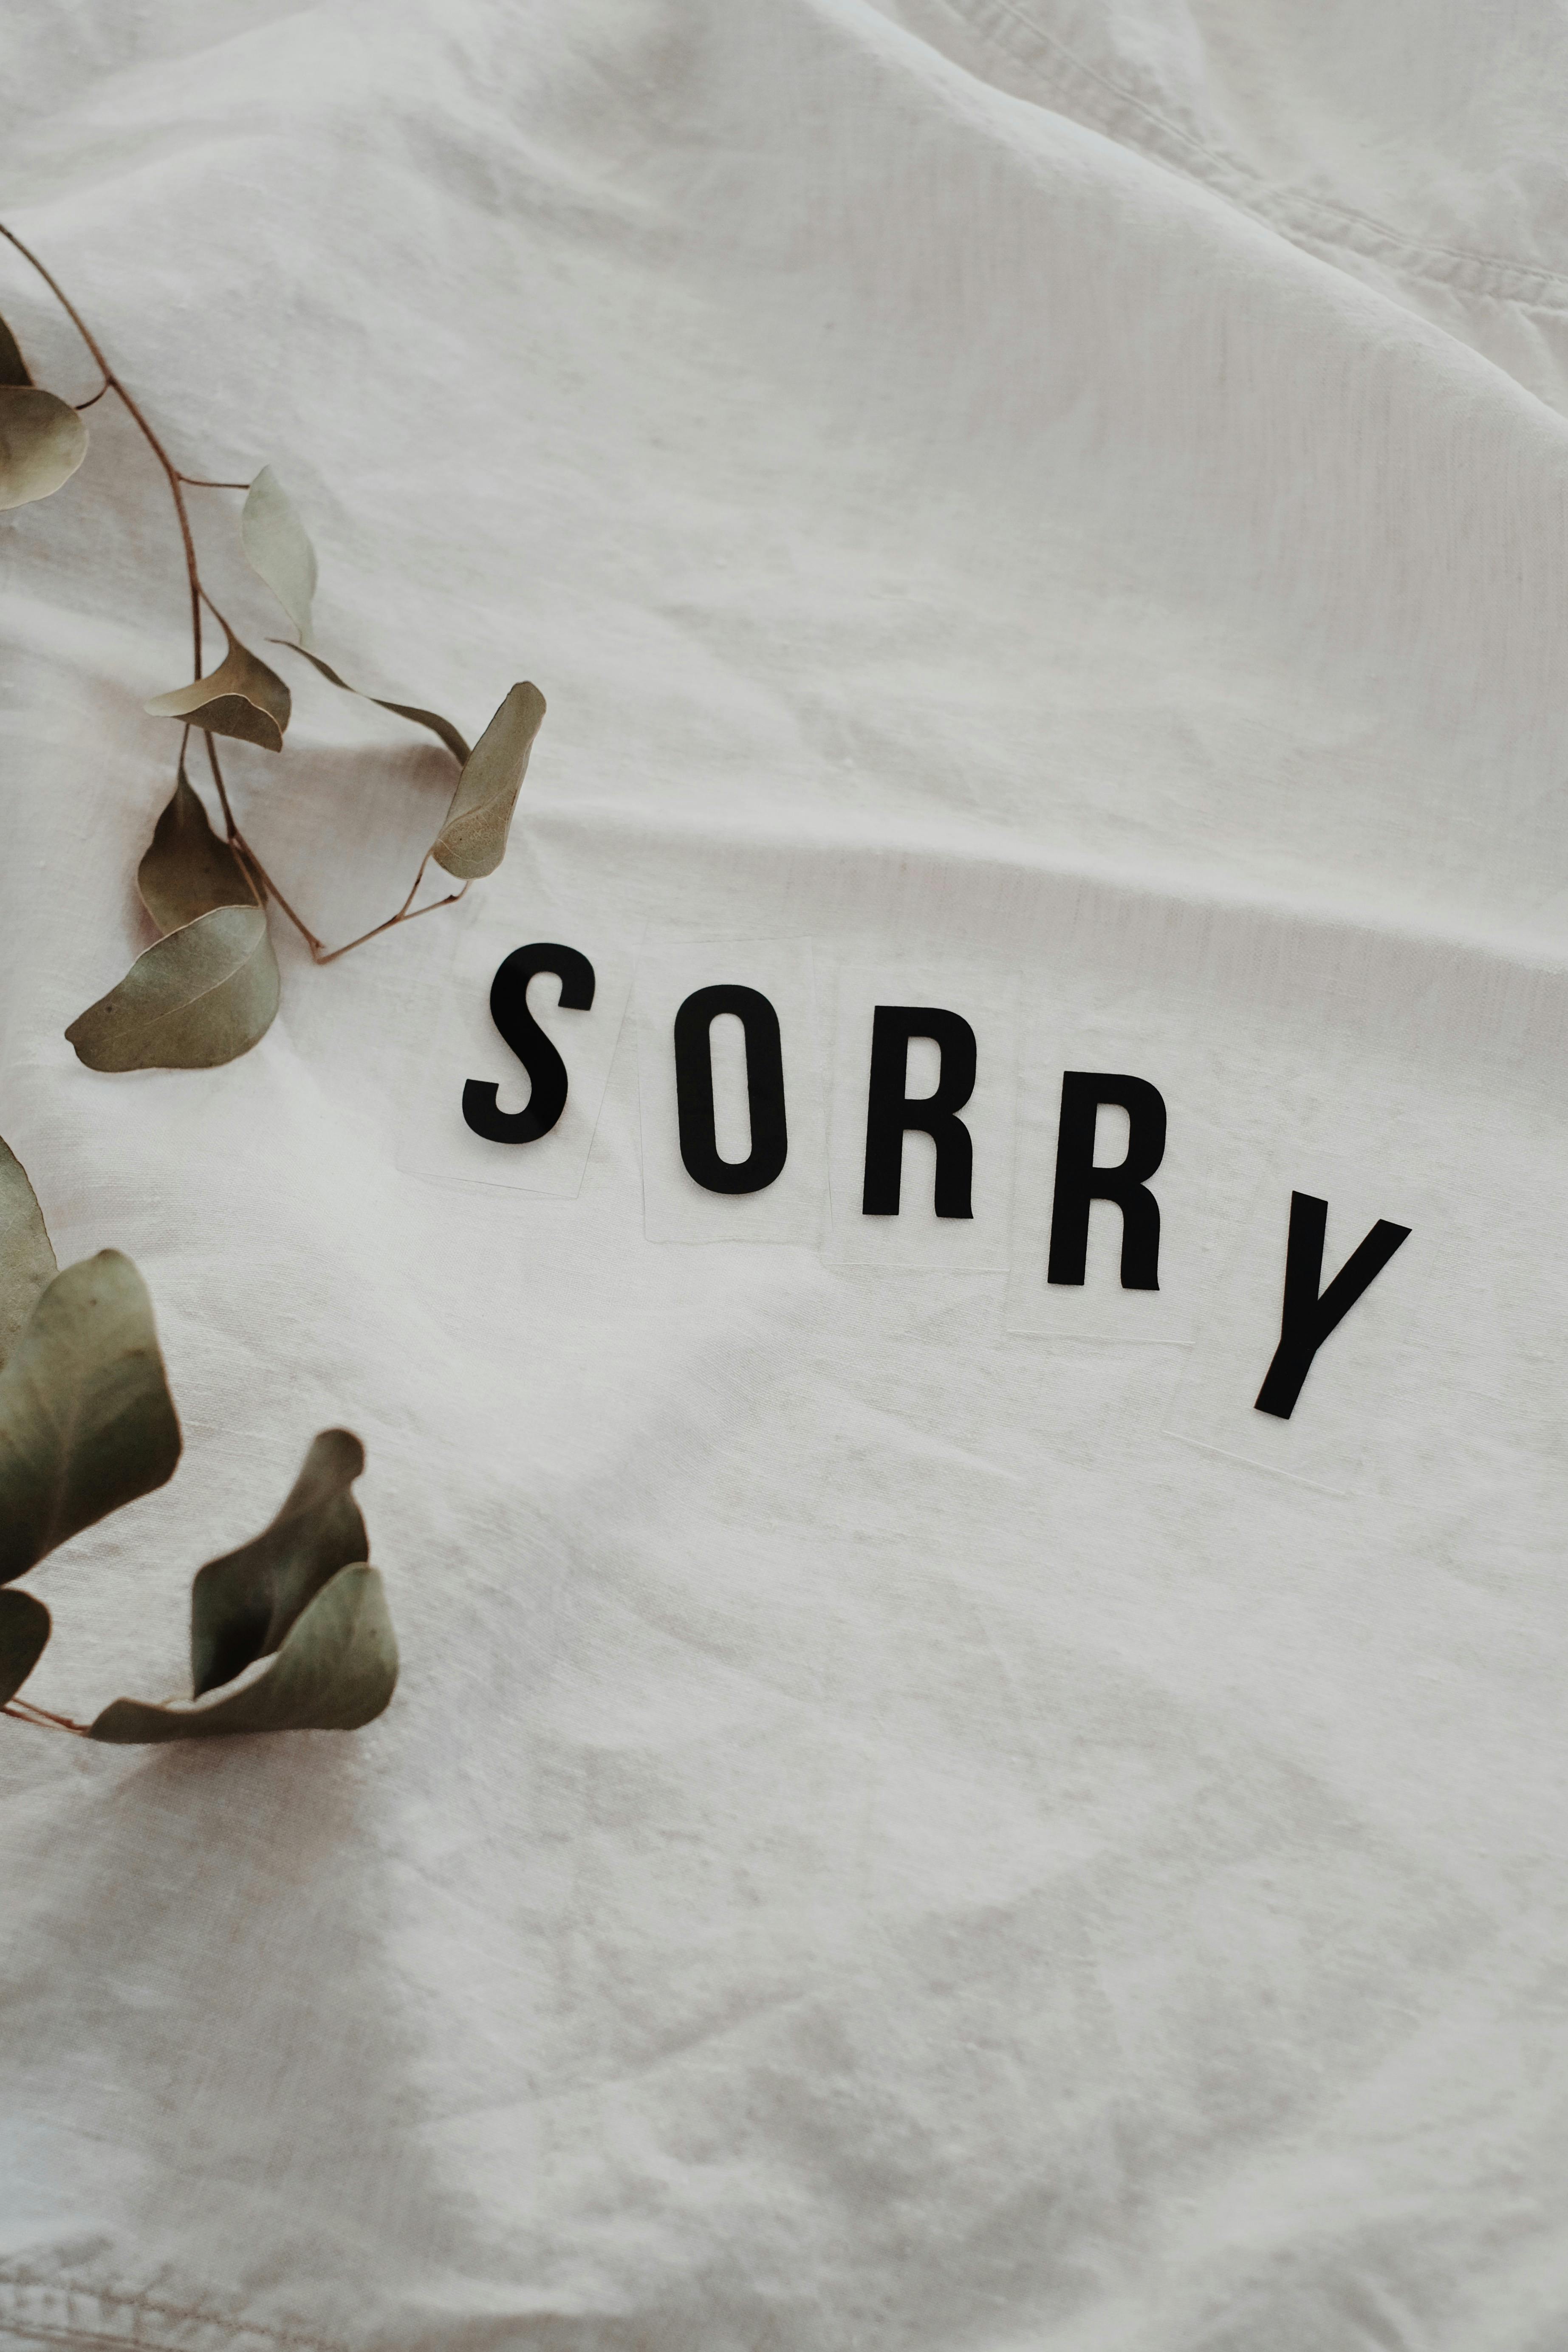 Sorry Photos, Download The BEST Free Sorry Stock Photos & HD Images